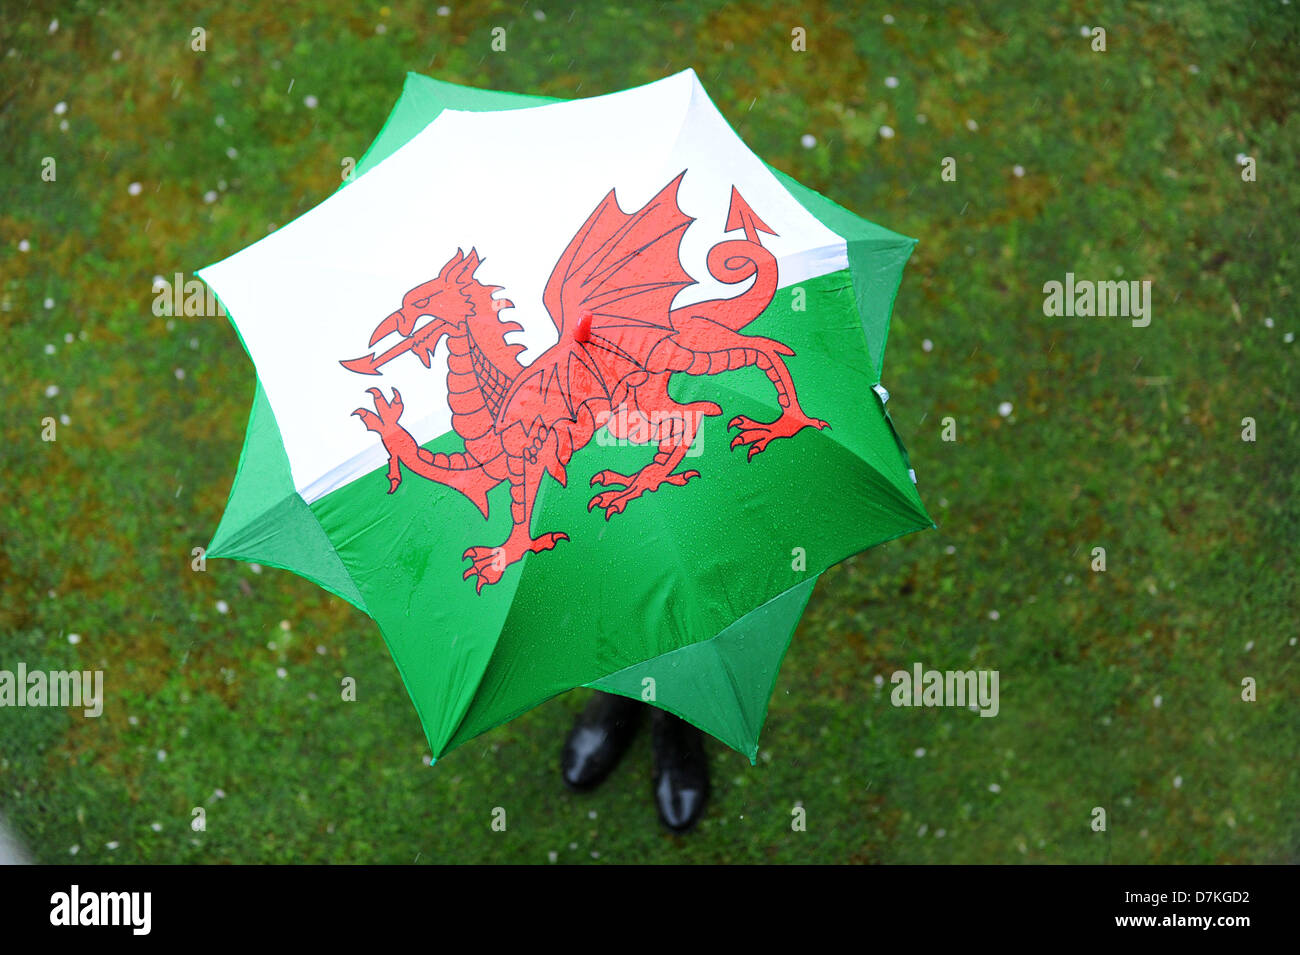 Cardiff, Wales, Uk. 9th May 2013.   A girl uses an umbrella to shelter from the rain in Rhiwbina, Cardiff. More wet weather has been forecast for the weekend. Credit: Matthew Horwood /Alamy Live News Stock Photo